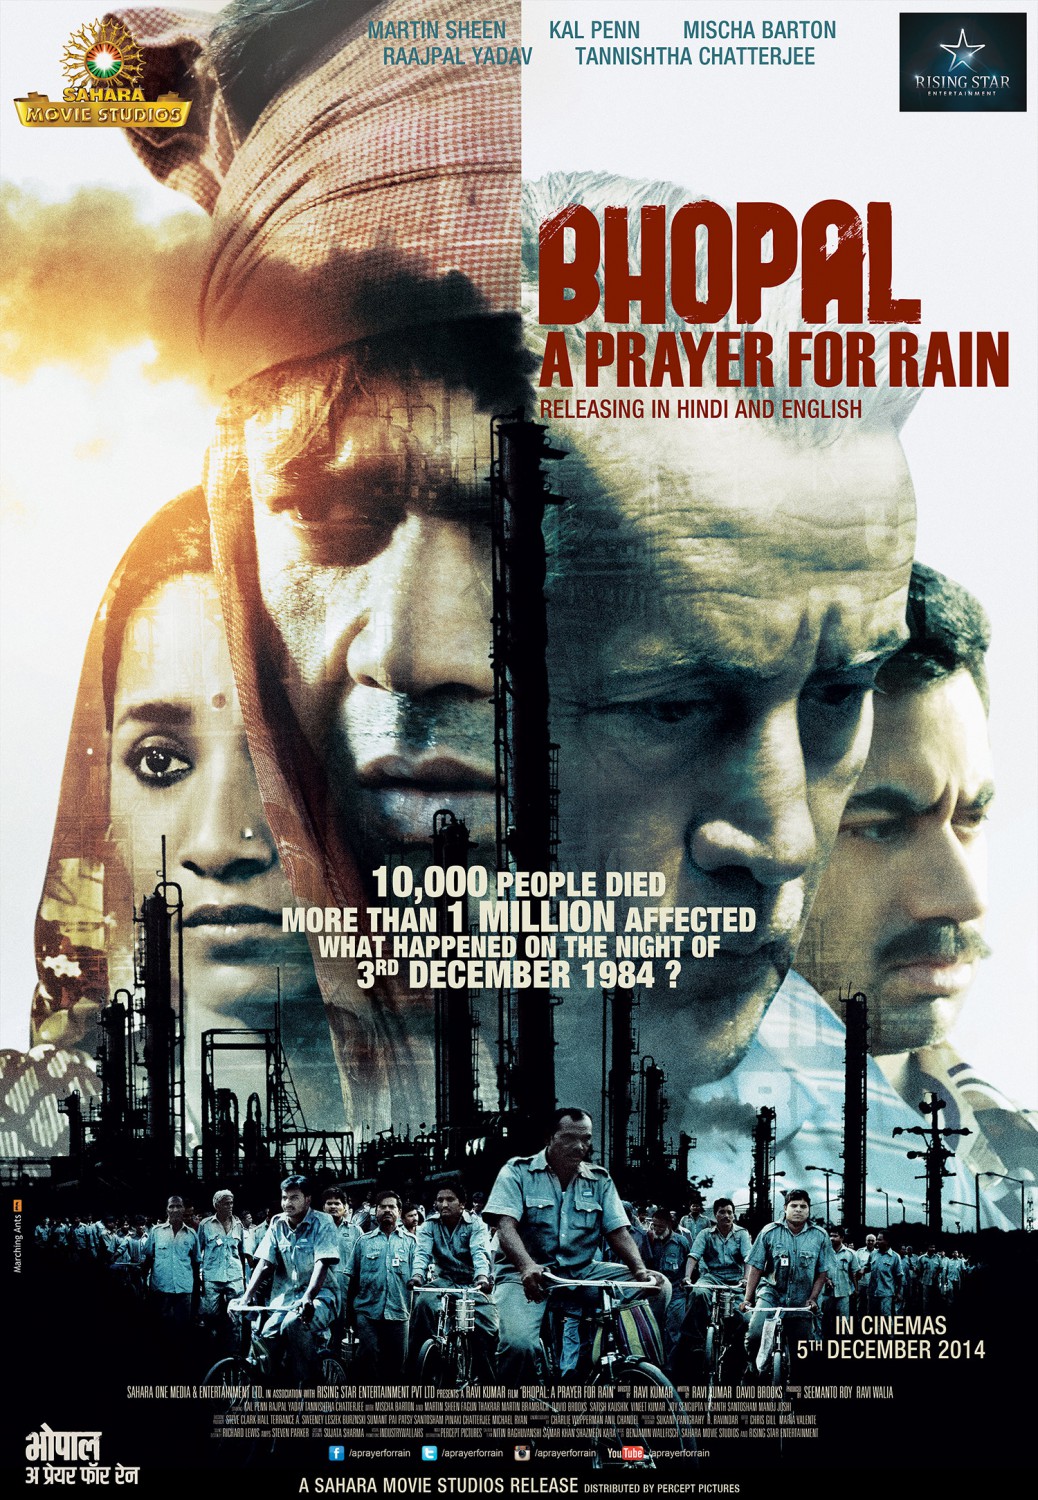 Extra Large Movie Poster Image for Bhopal: A Prayer for Rain (#5 of 5)